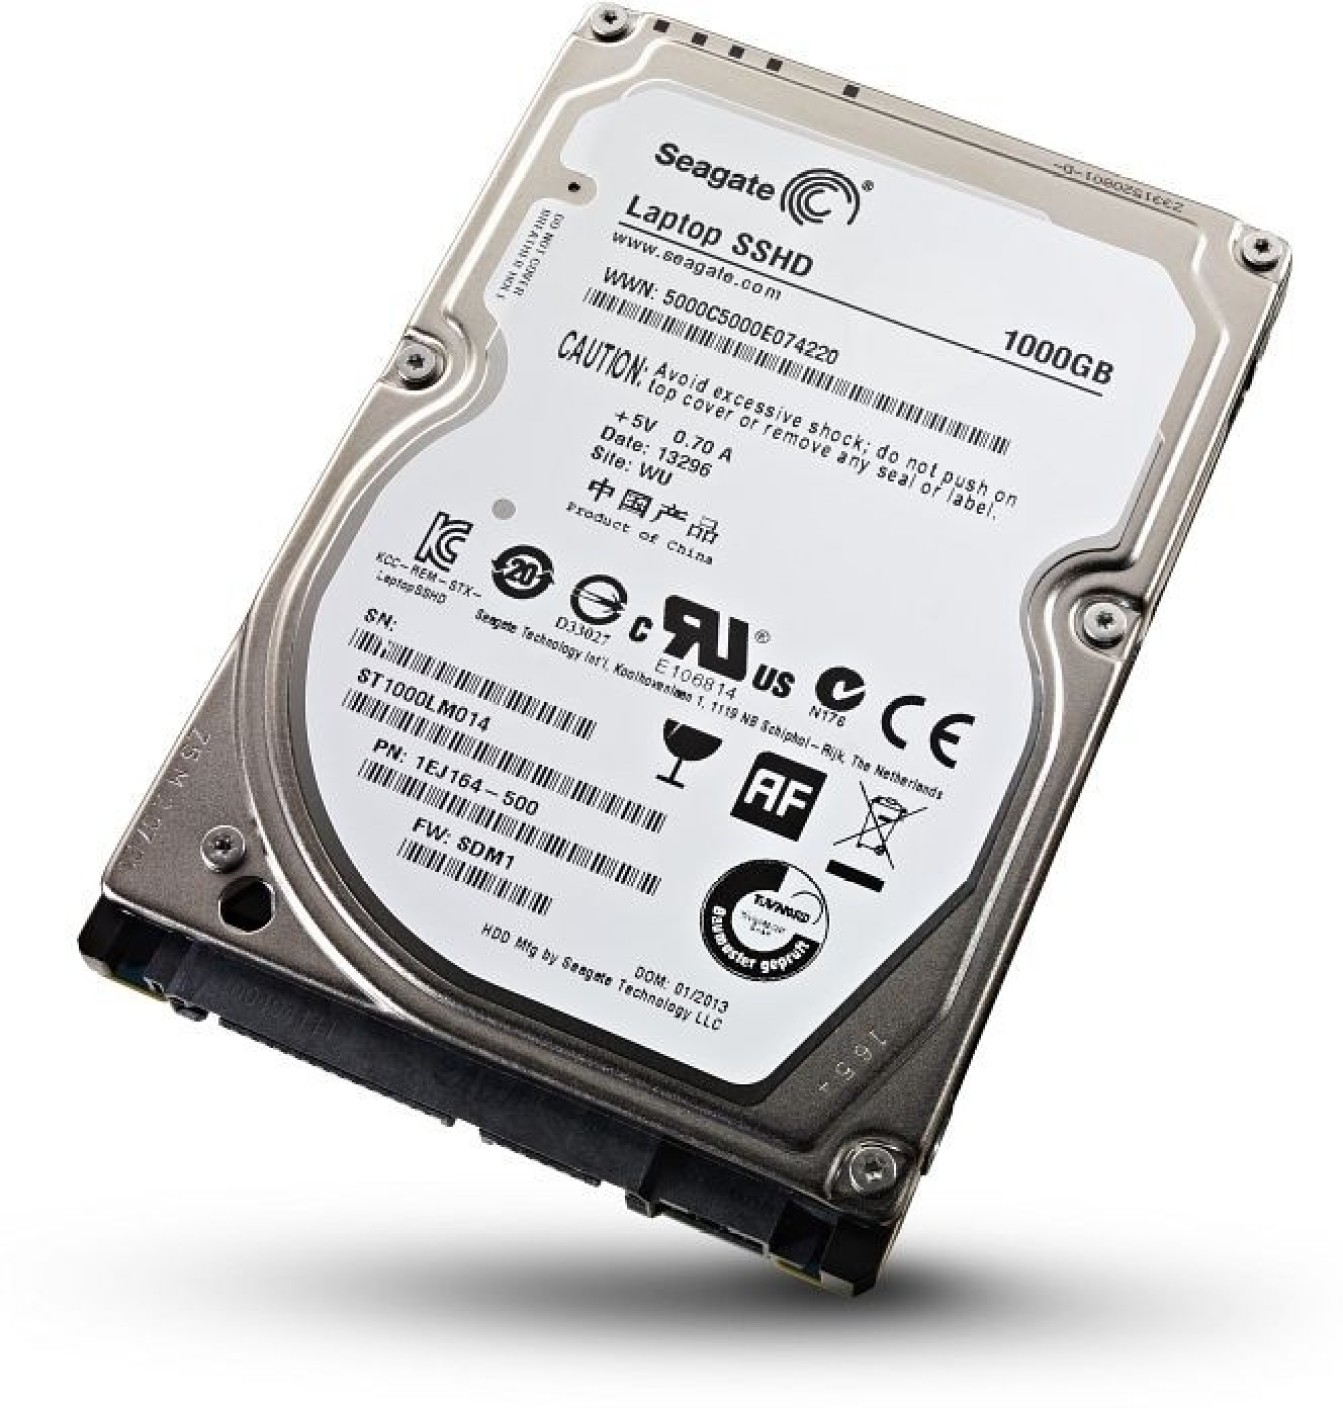 Seagate Solid State Hybrid Drive 9.5 mm thickness 1 TB